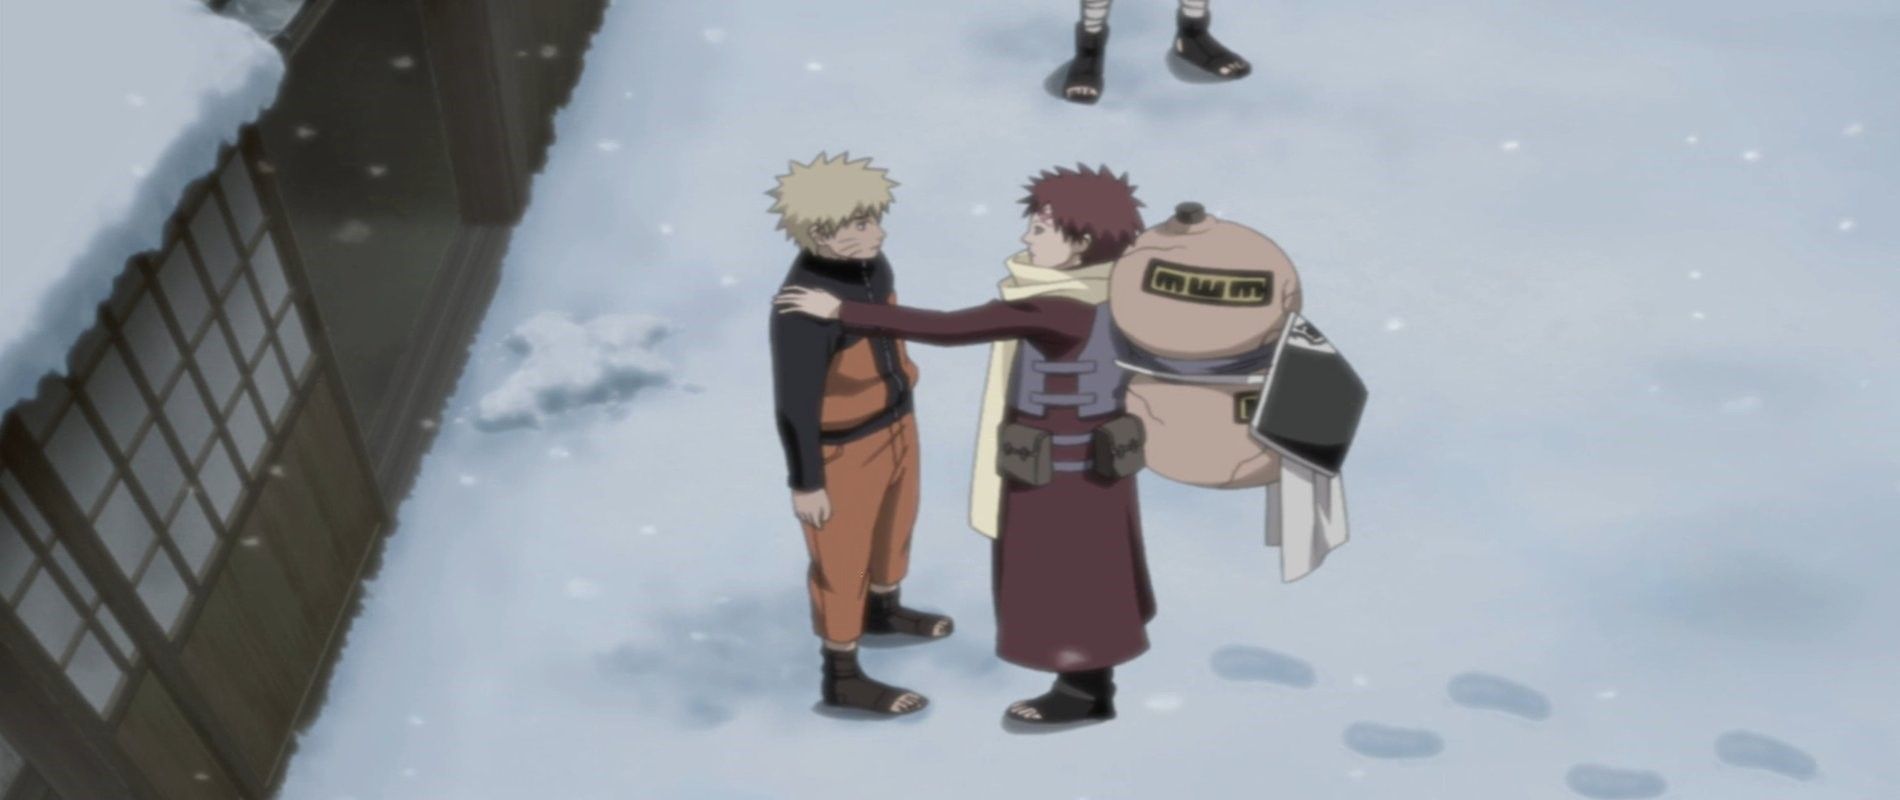 Gaara putting a hand on Naruto's shoulder in support in Naruto